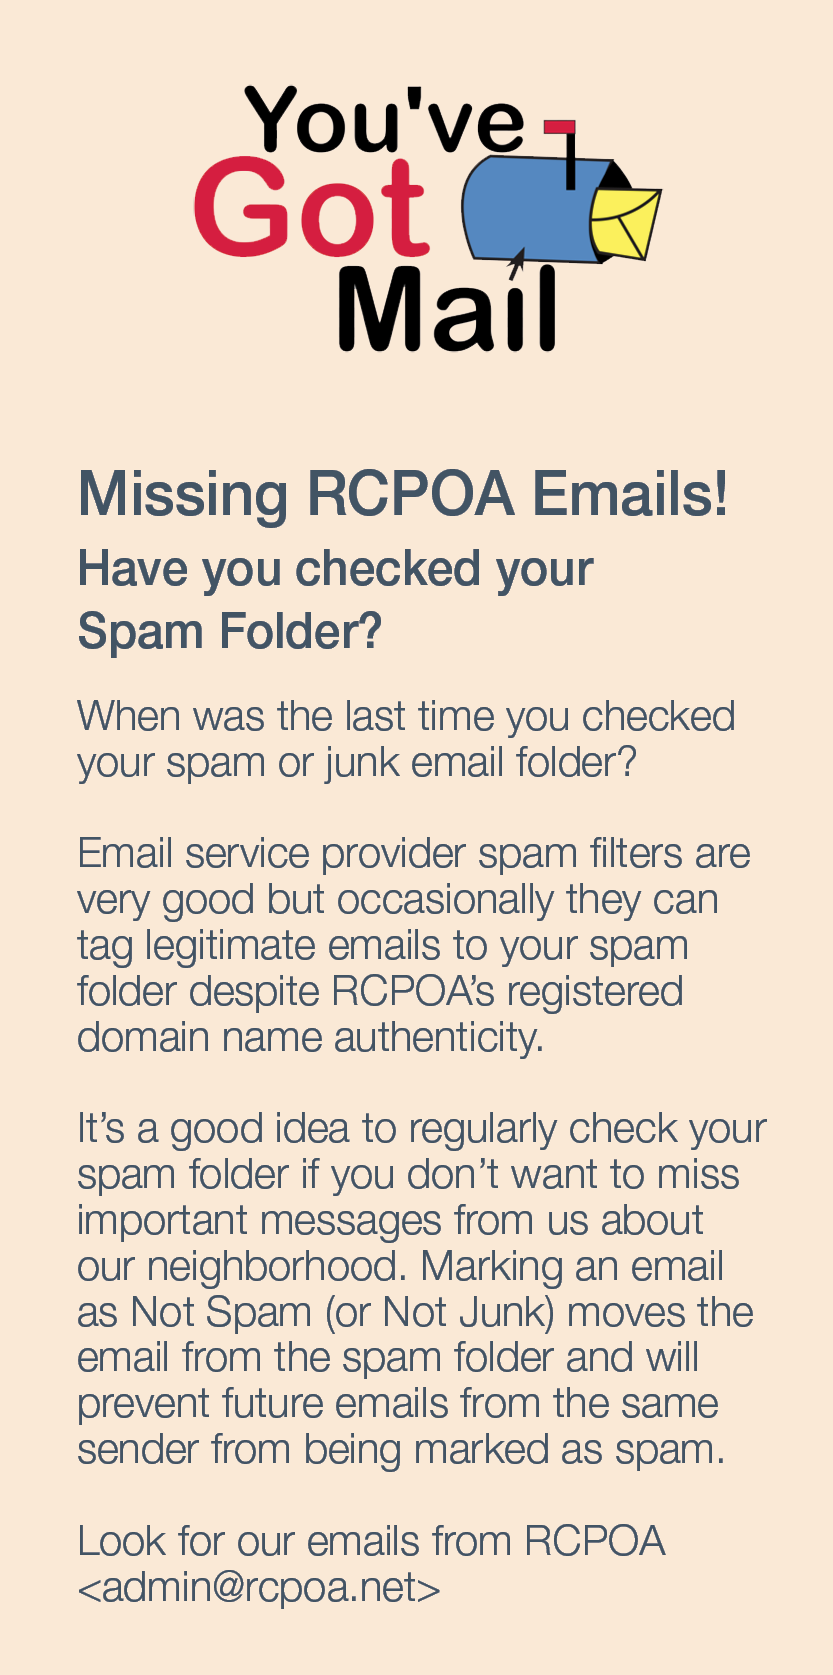 Are you missing RCPOA emails?